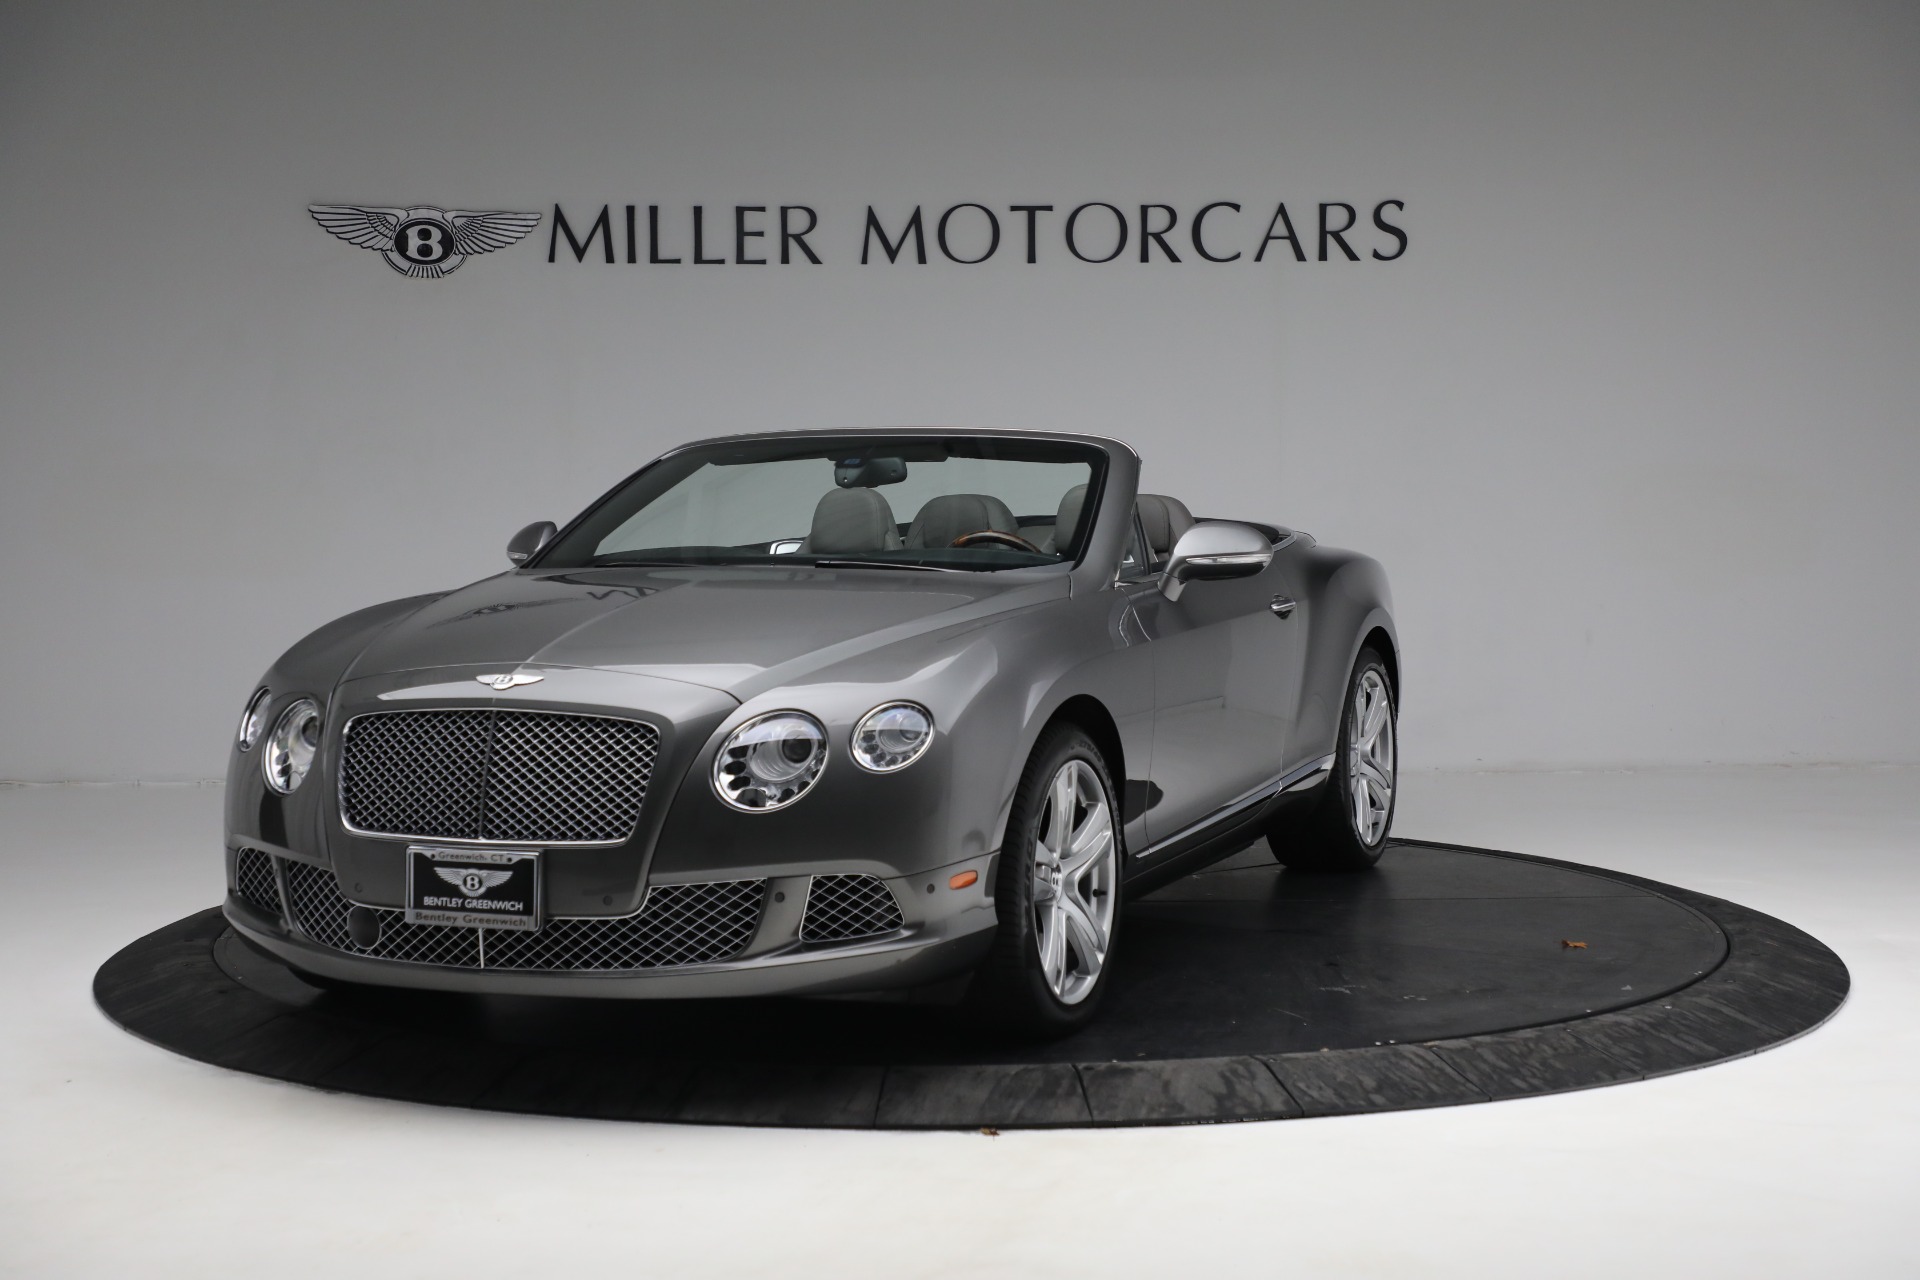 Used 2013 Bentley Continental GT W12 for sale Sold at Aston Martin of Greenwich in Greenwich CT 06830 1